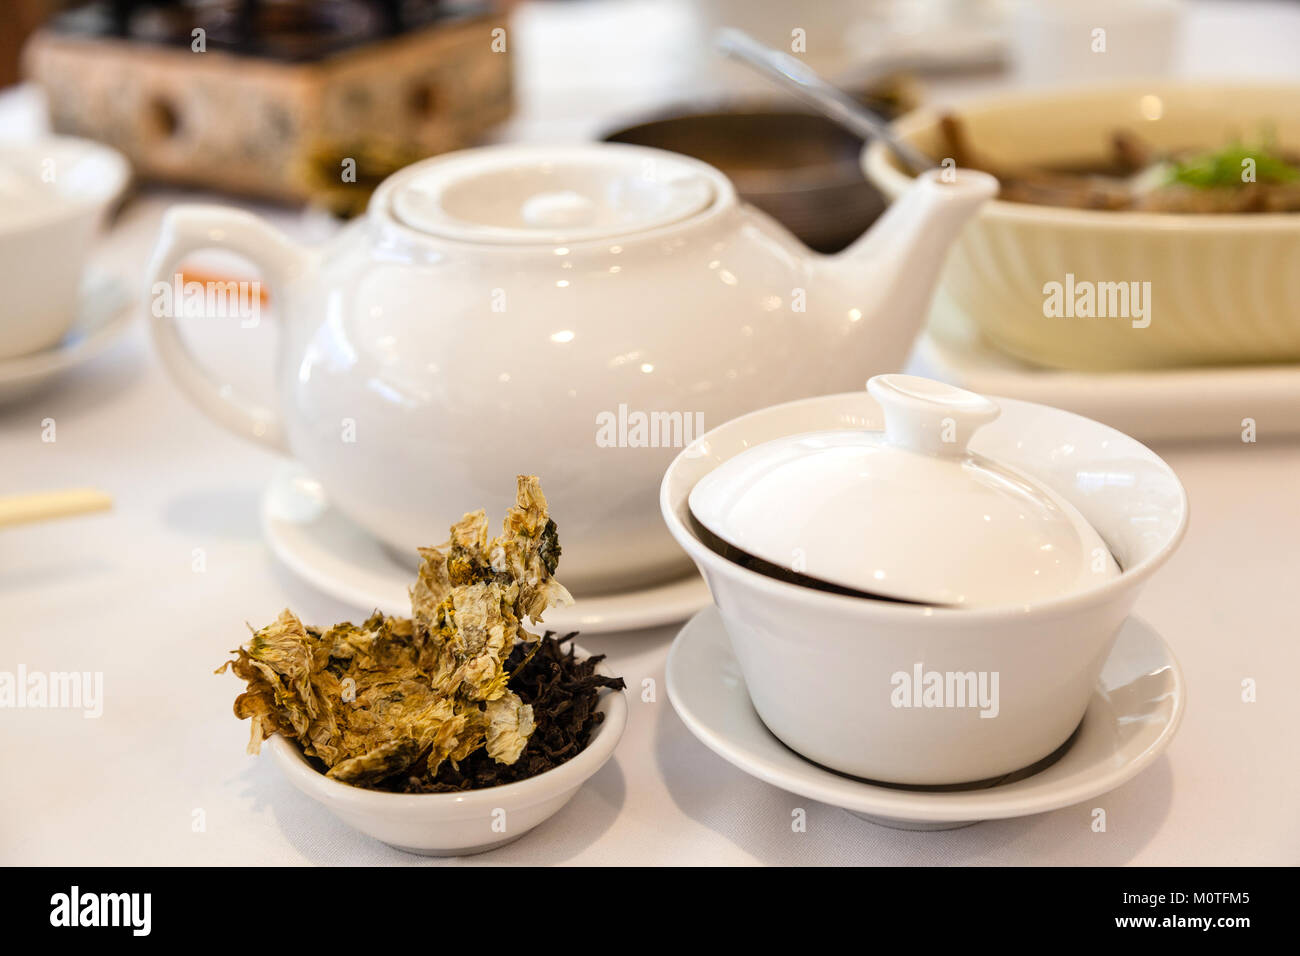 Brewing Chinese tea for dim sum meal with tea leaves and traditional tea cup in the foreground. Stock Photo